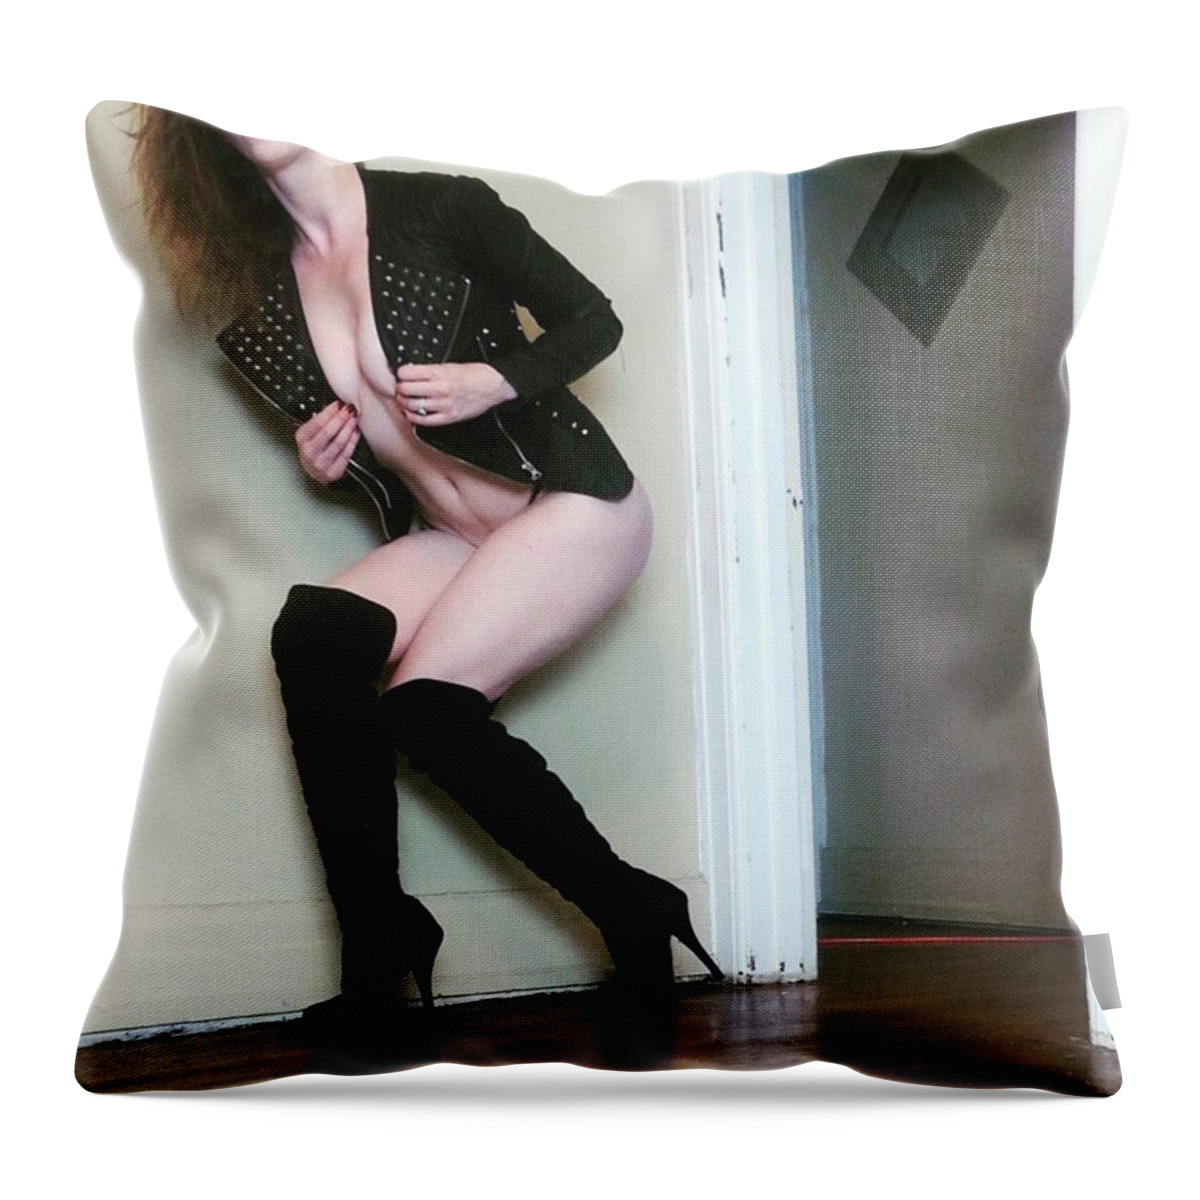 Beautiful Throw Pillow featuring the photograph Rock And Roll Princess by Sammy Shayne